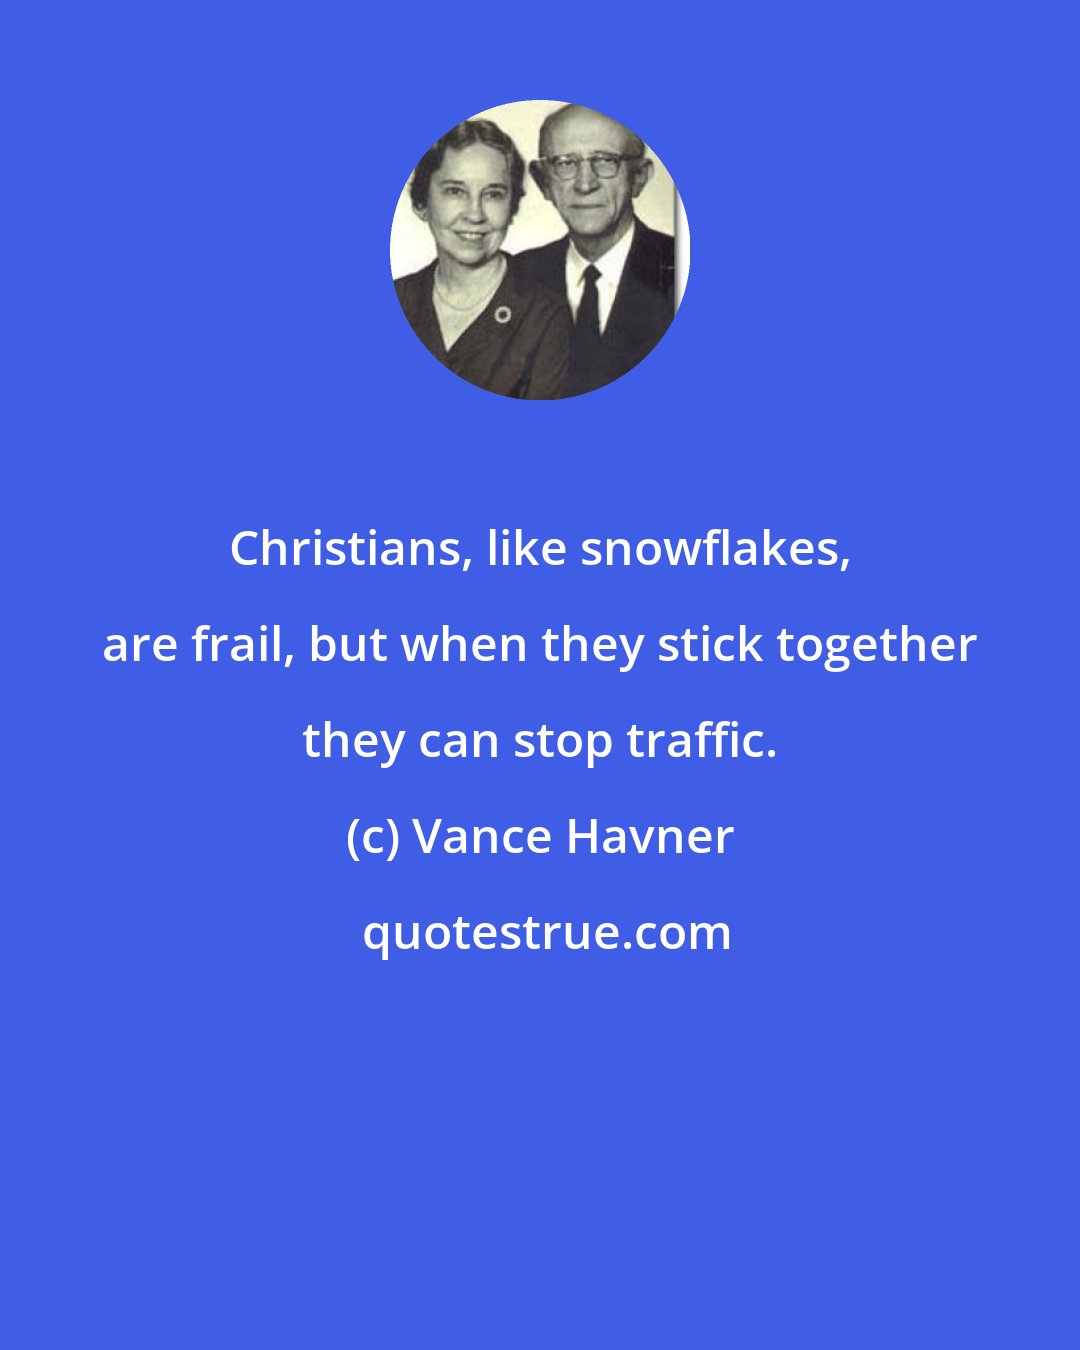 Vance Havner: Christians, like snowflakes, are frail, but when they stick together they can stop traffic.